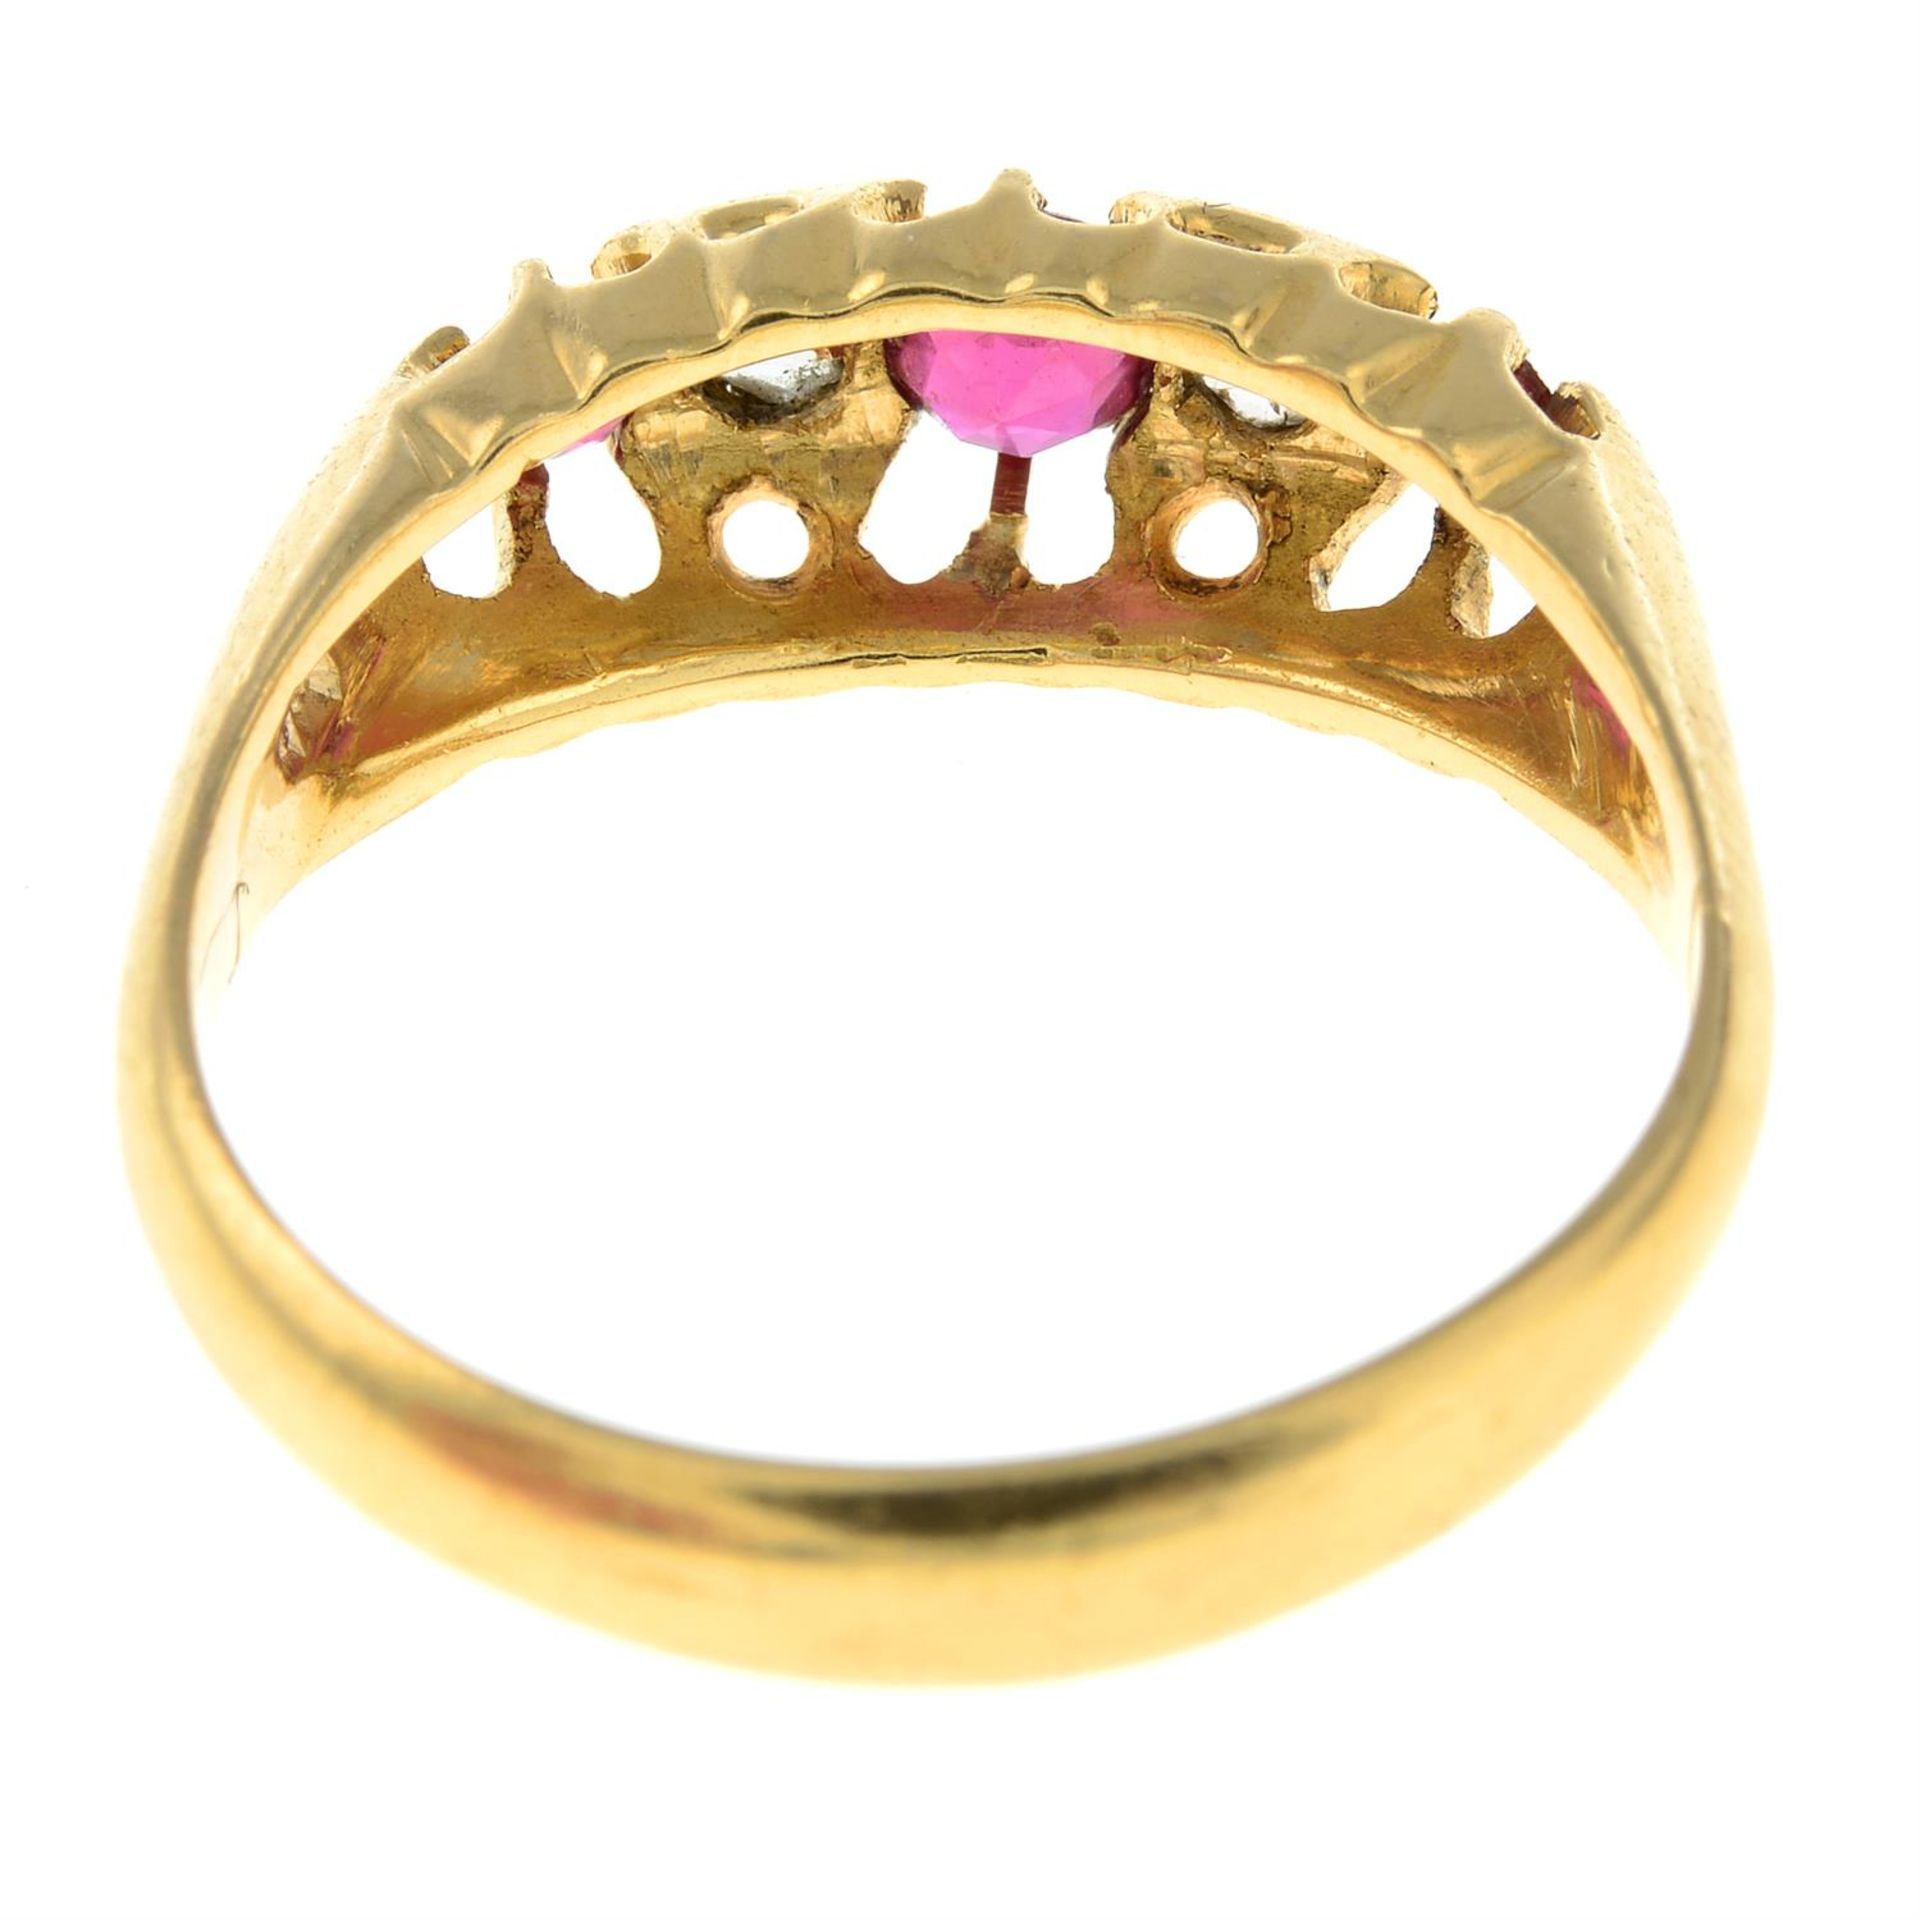 An early 20th century18ct gold ruby and rose-cut diamond five-stone ring. - Image 2 of 2